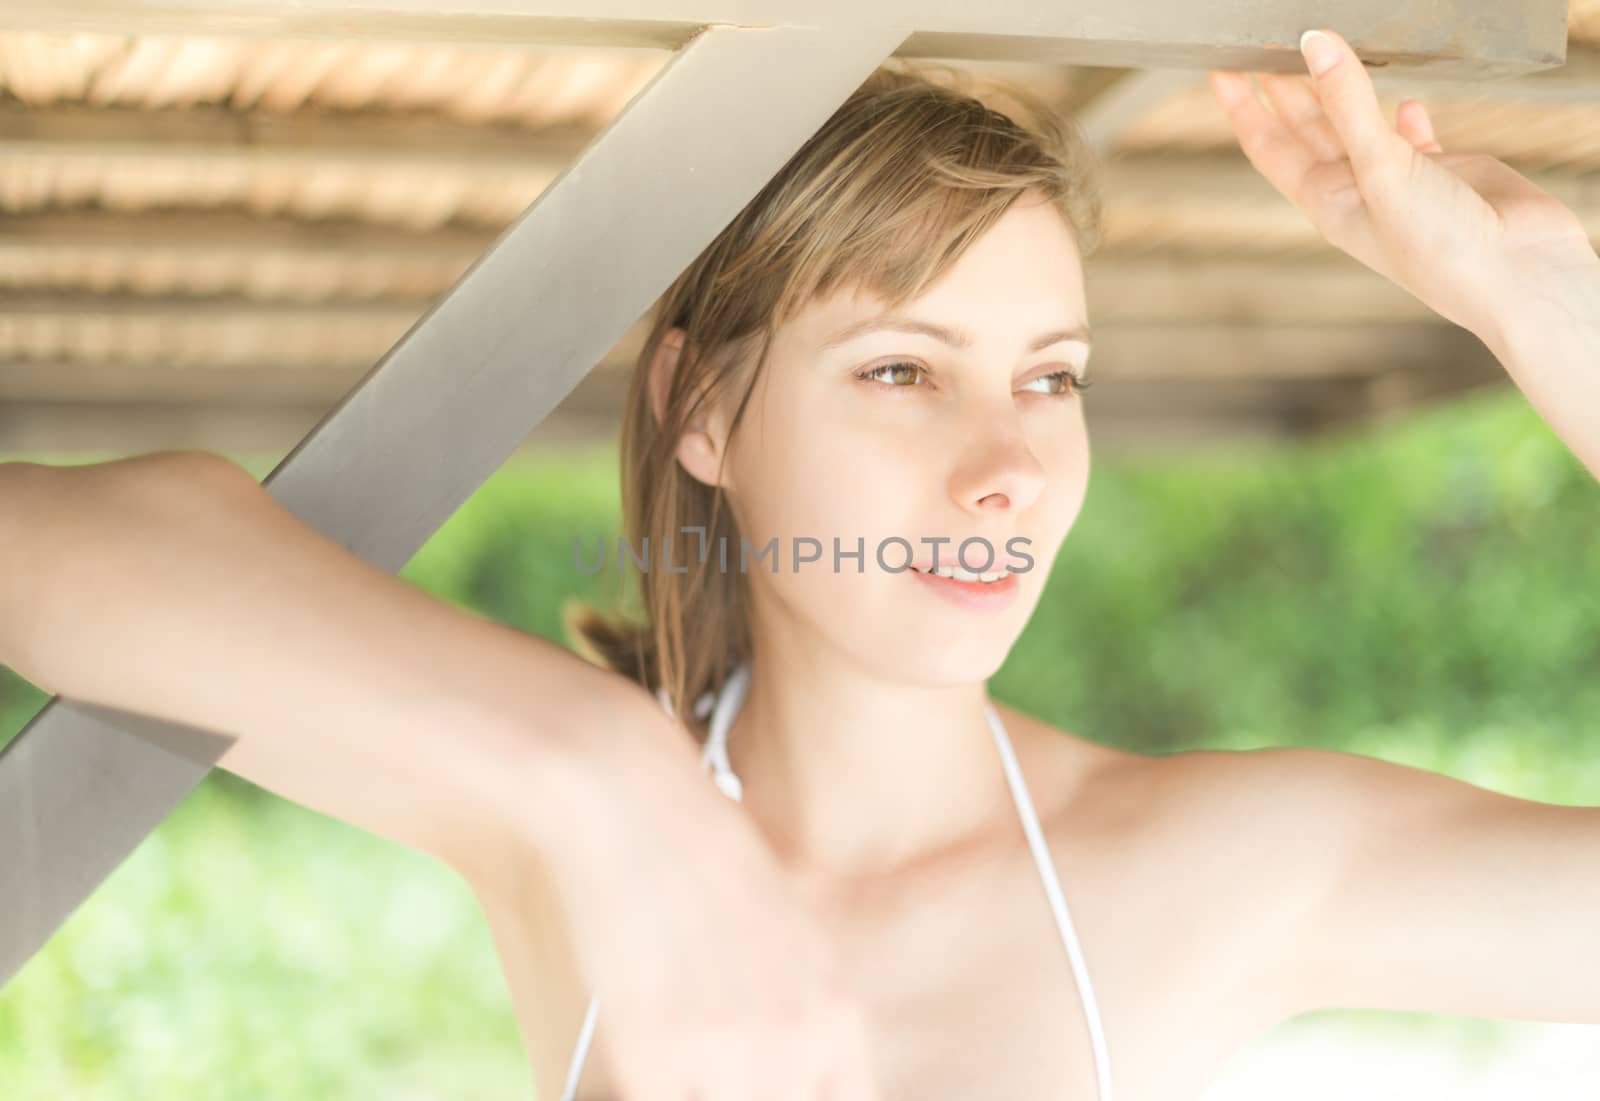 Pretty girl standing under wooden pier and smiling. Beautiful young woman on beach. Green trees in background. Leisure activity outdoor. Idea of summer vacation. Popular tourist place for holiday.